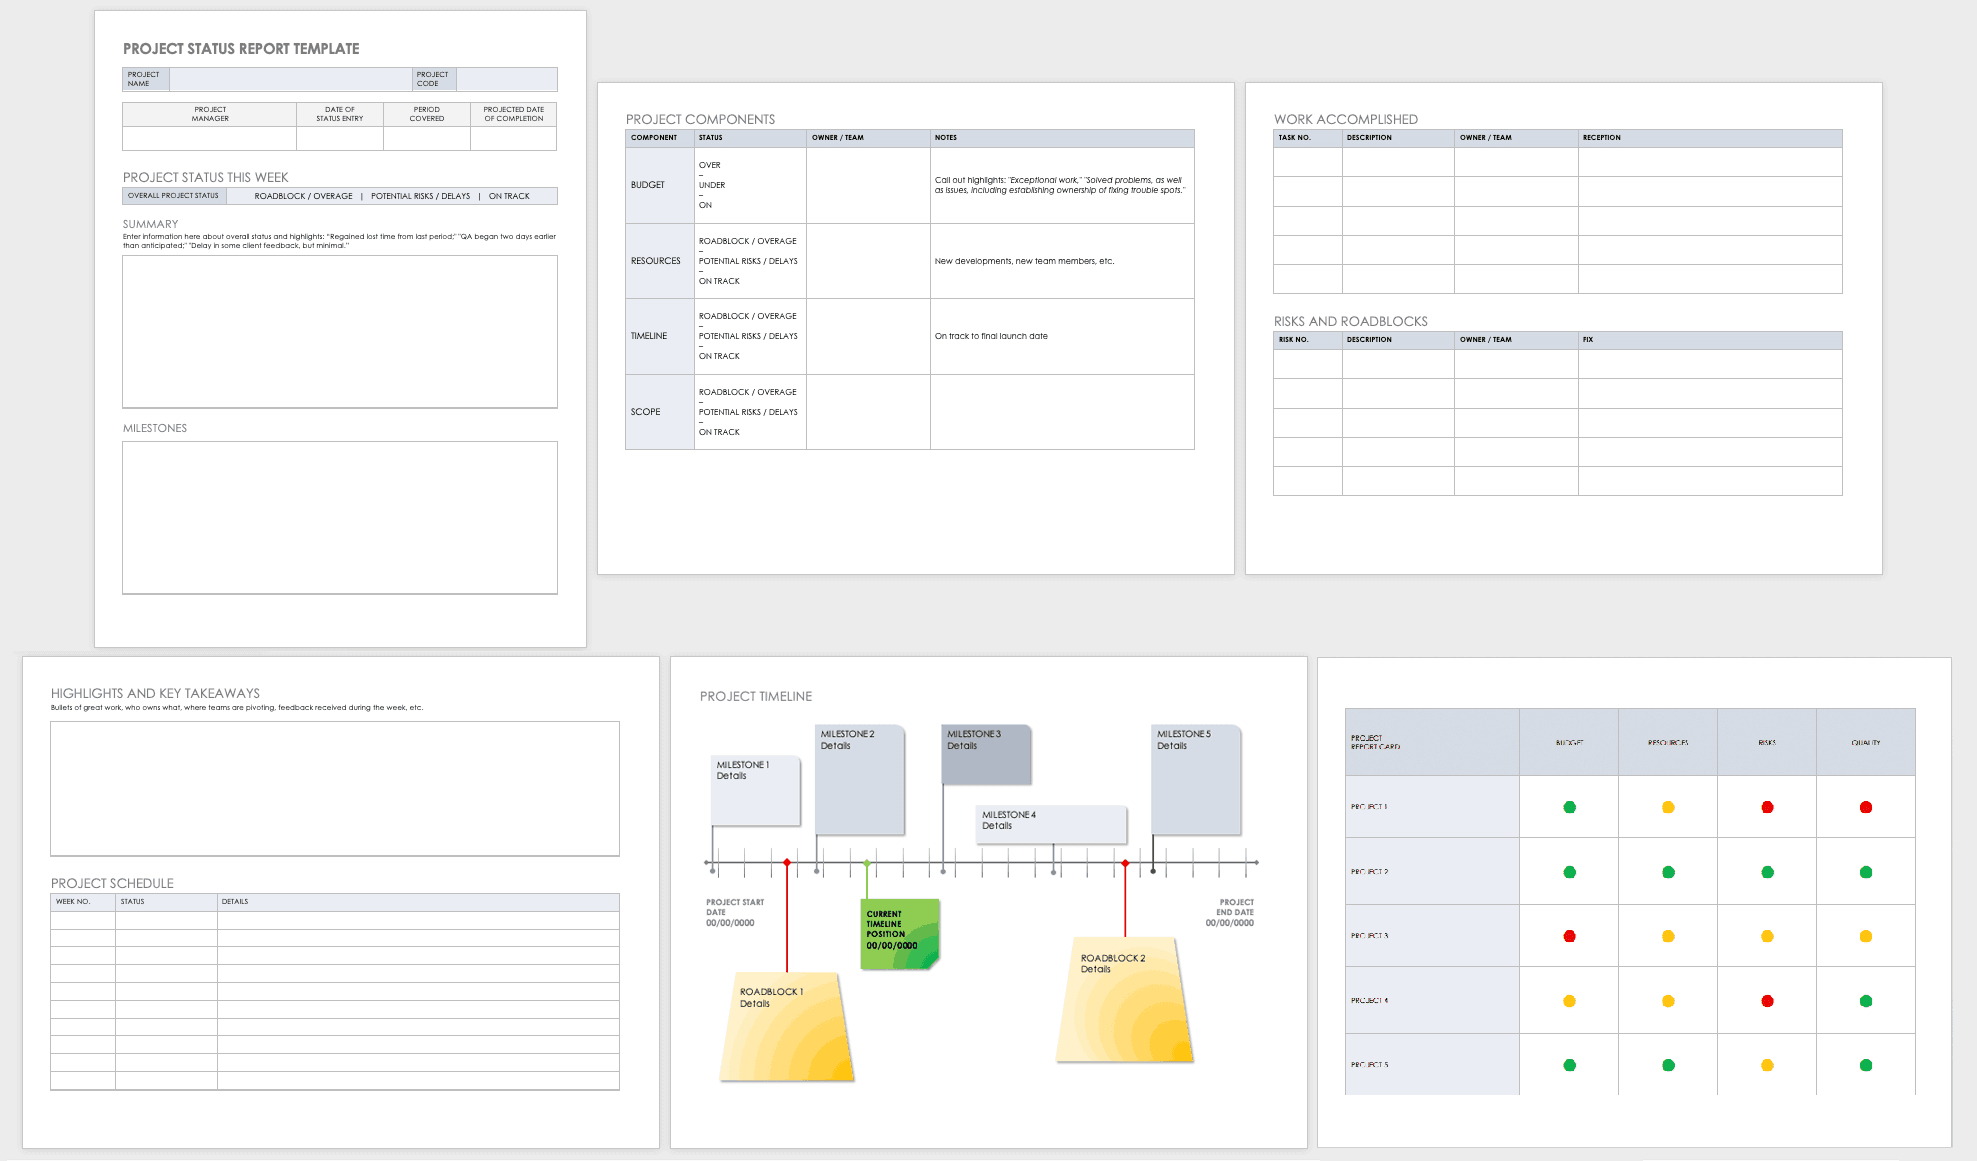 Free Project Report Templates | Smartsheet In Project Management Final Report Template